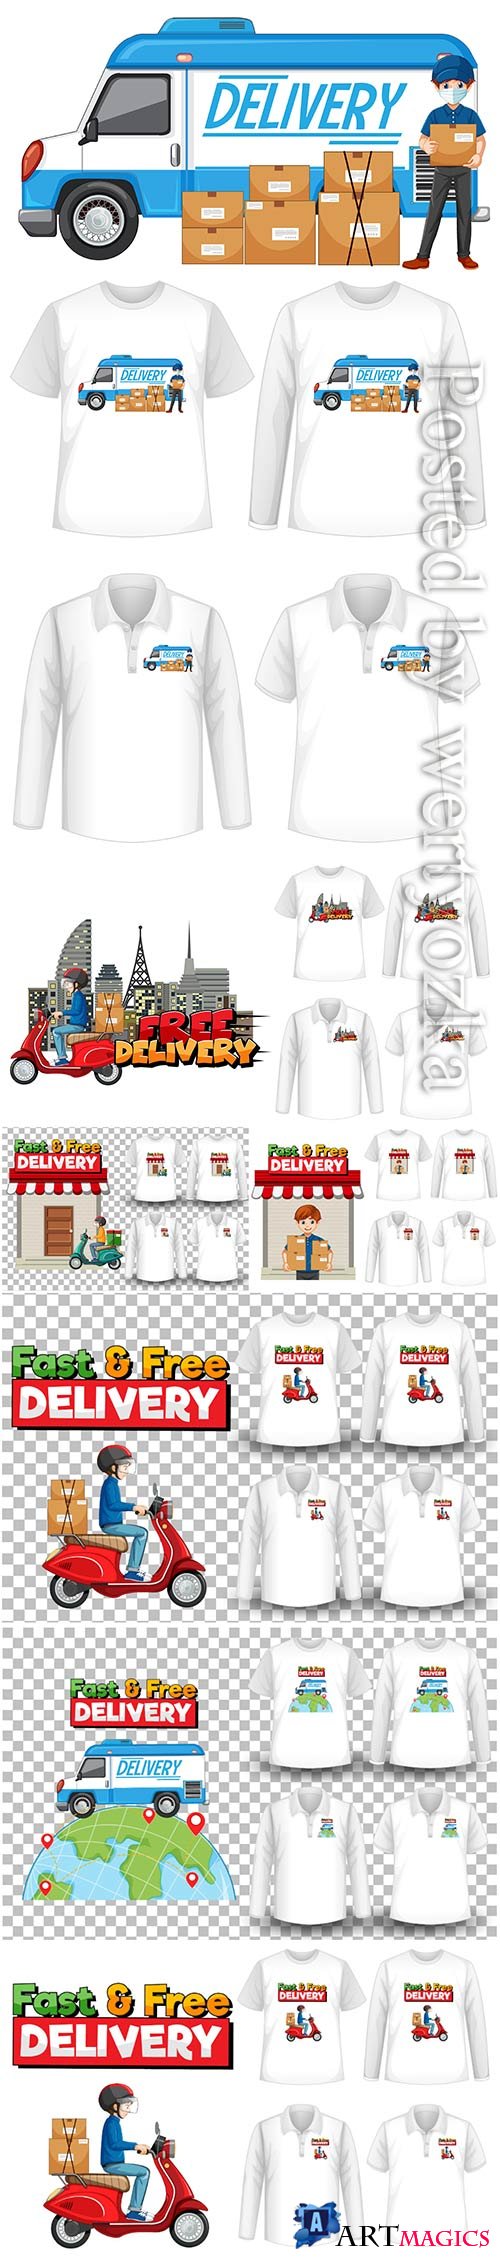 Set of mockup shirt with delivery theme in vector